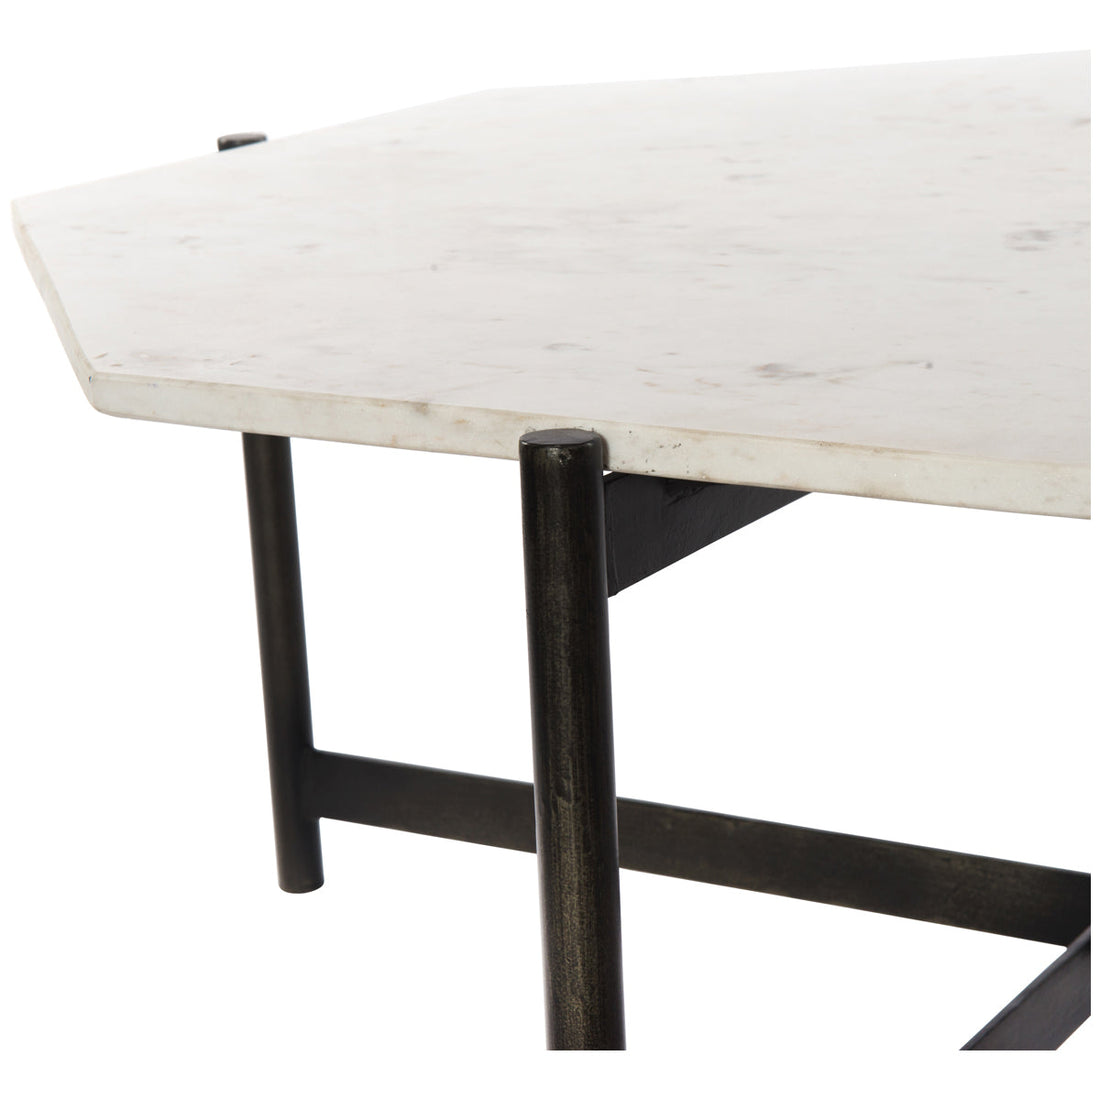 Four Hands Marlow Adair Coffee Table - Hammered Grey